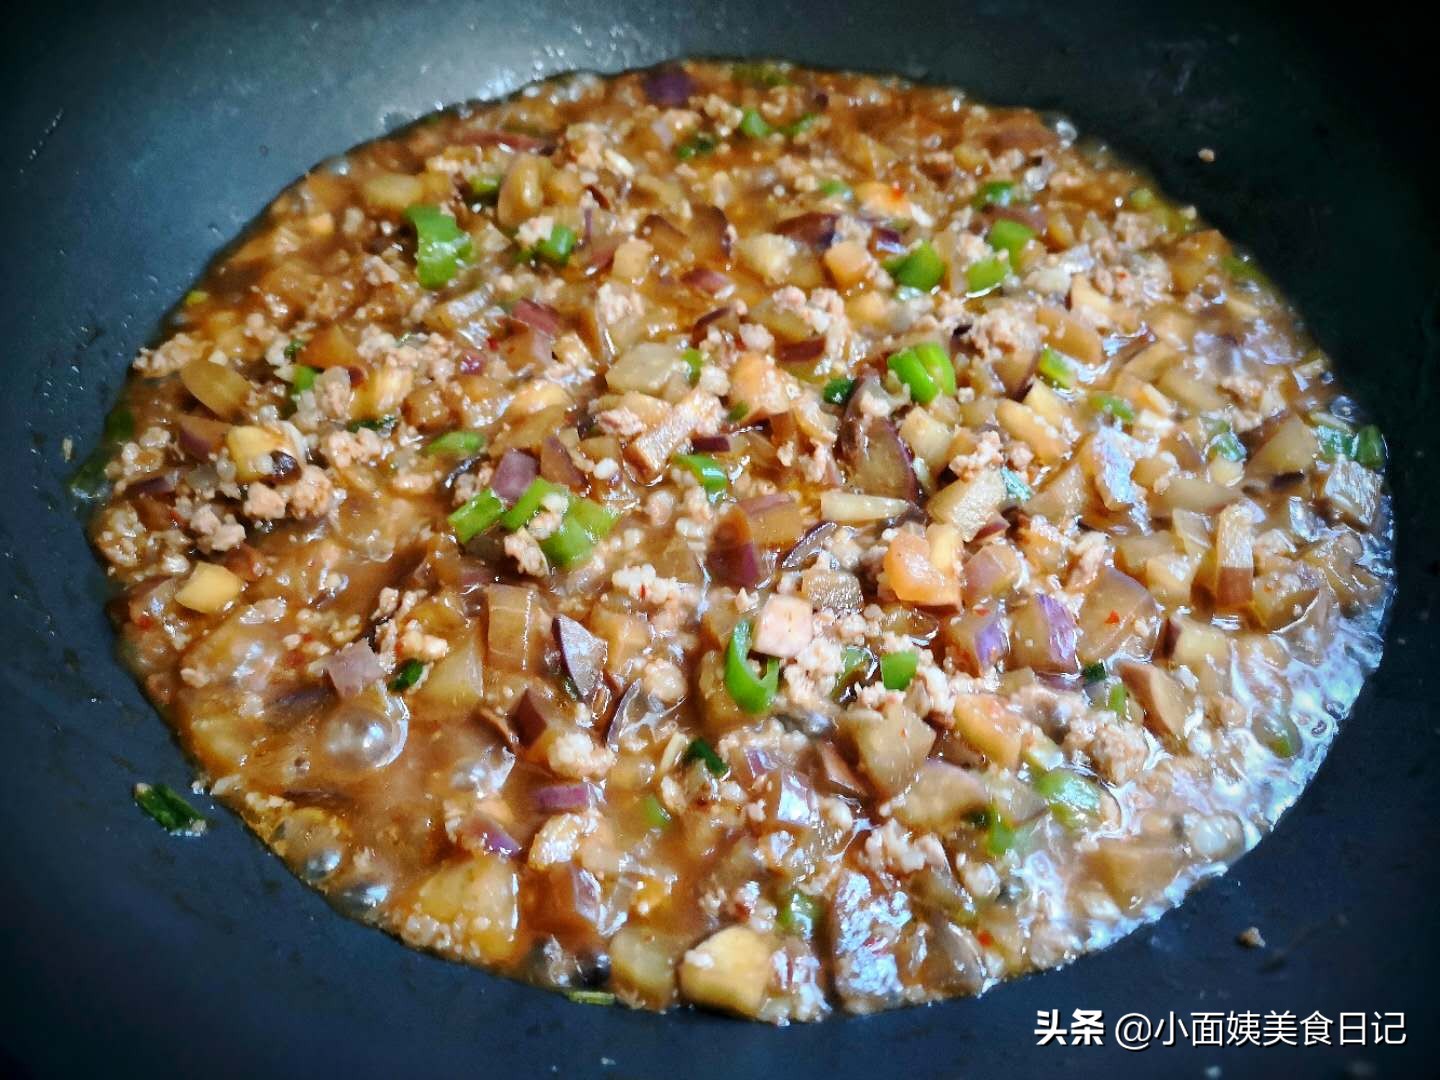 Old hot days, the greediest this bowl of face, sauce is sweet full-bodied, a week eats 5 times to be disrelished little, sweeter than face of fried bean sauce